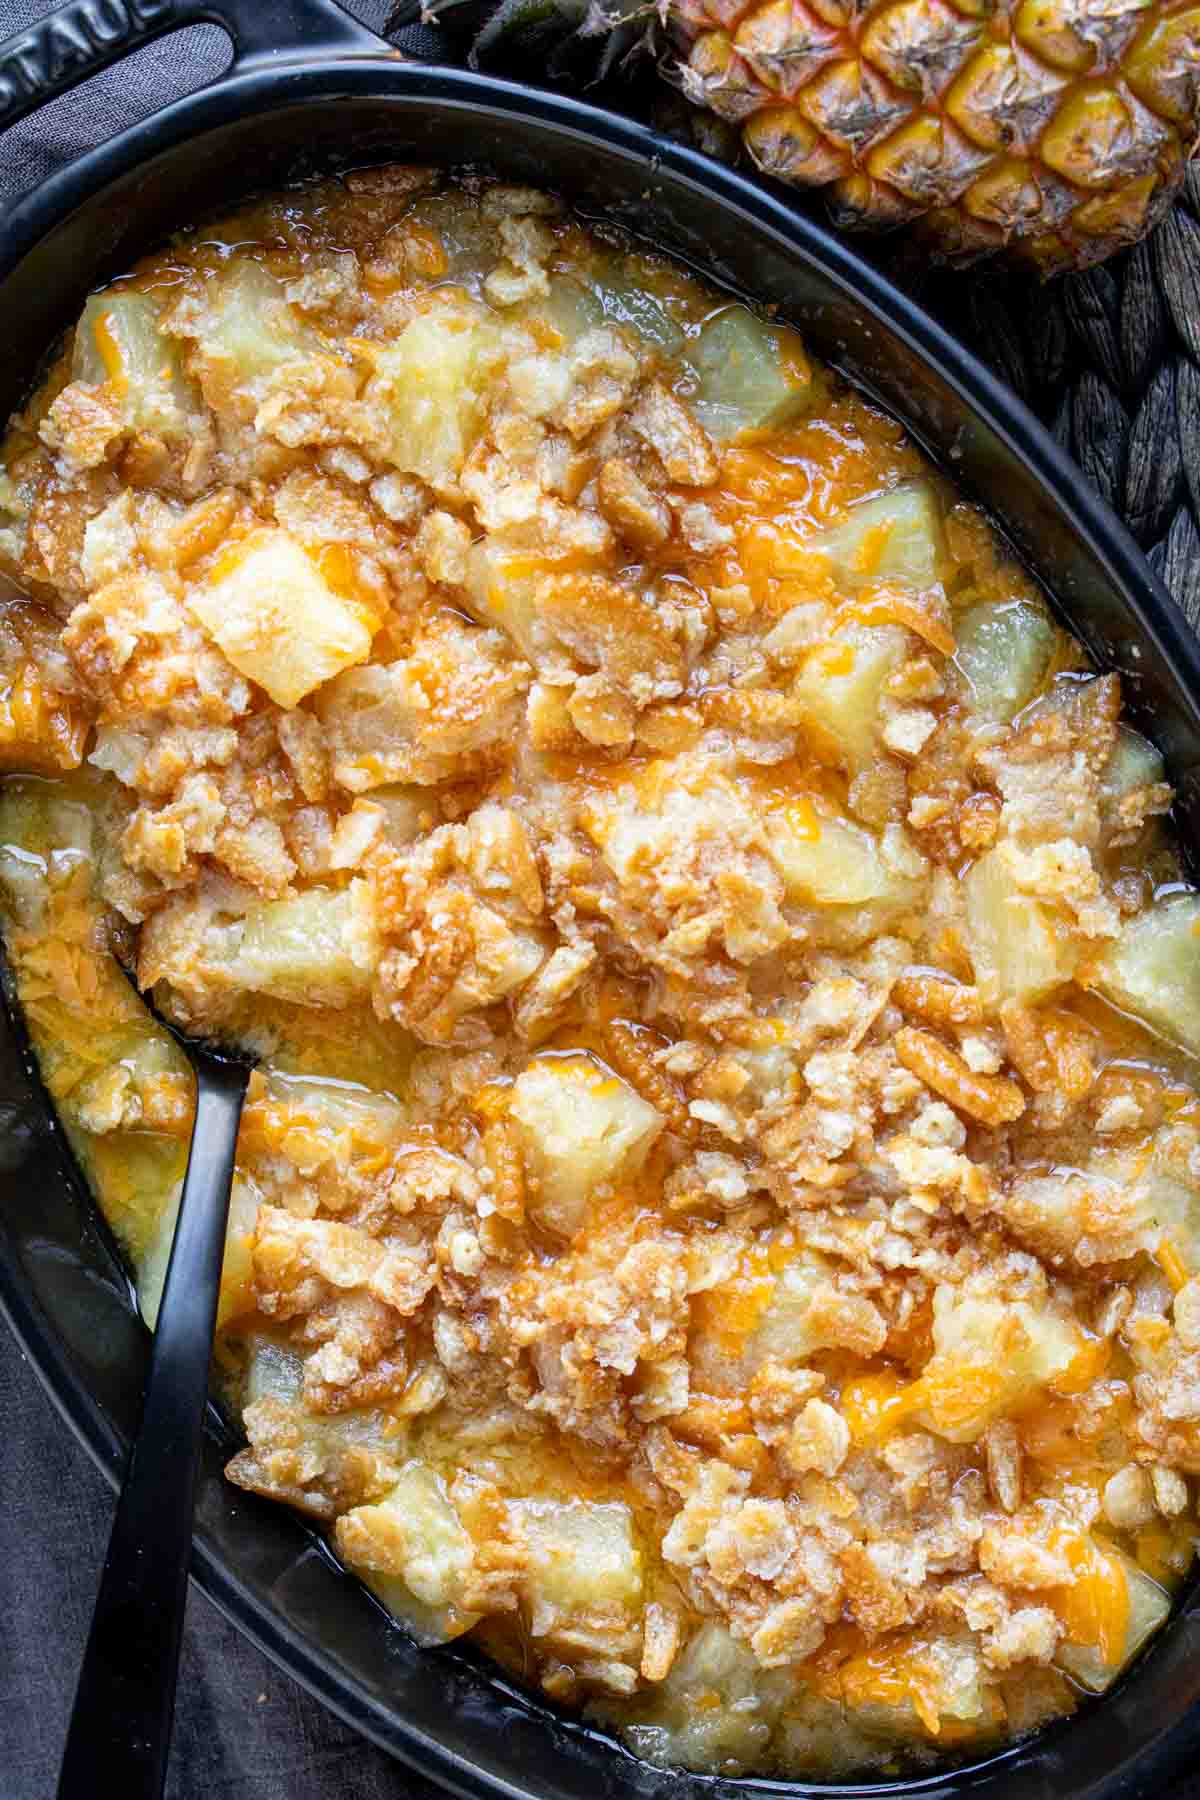 Pineapple casserole in a black skillet with a spoon.